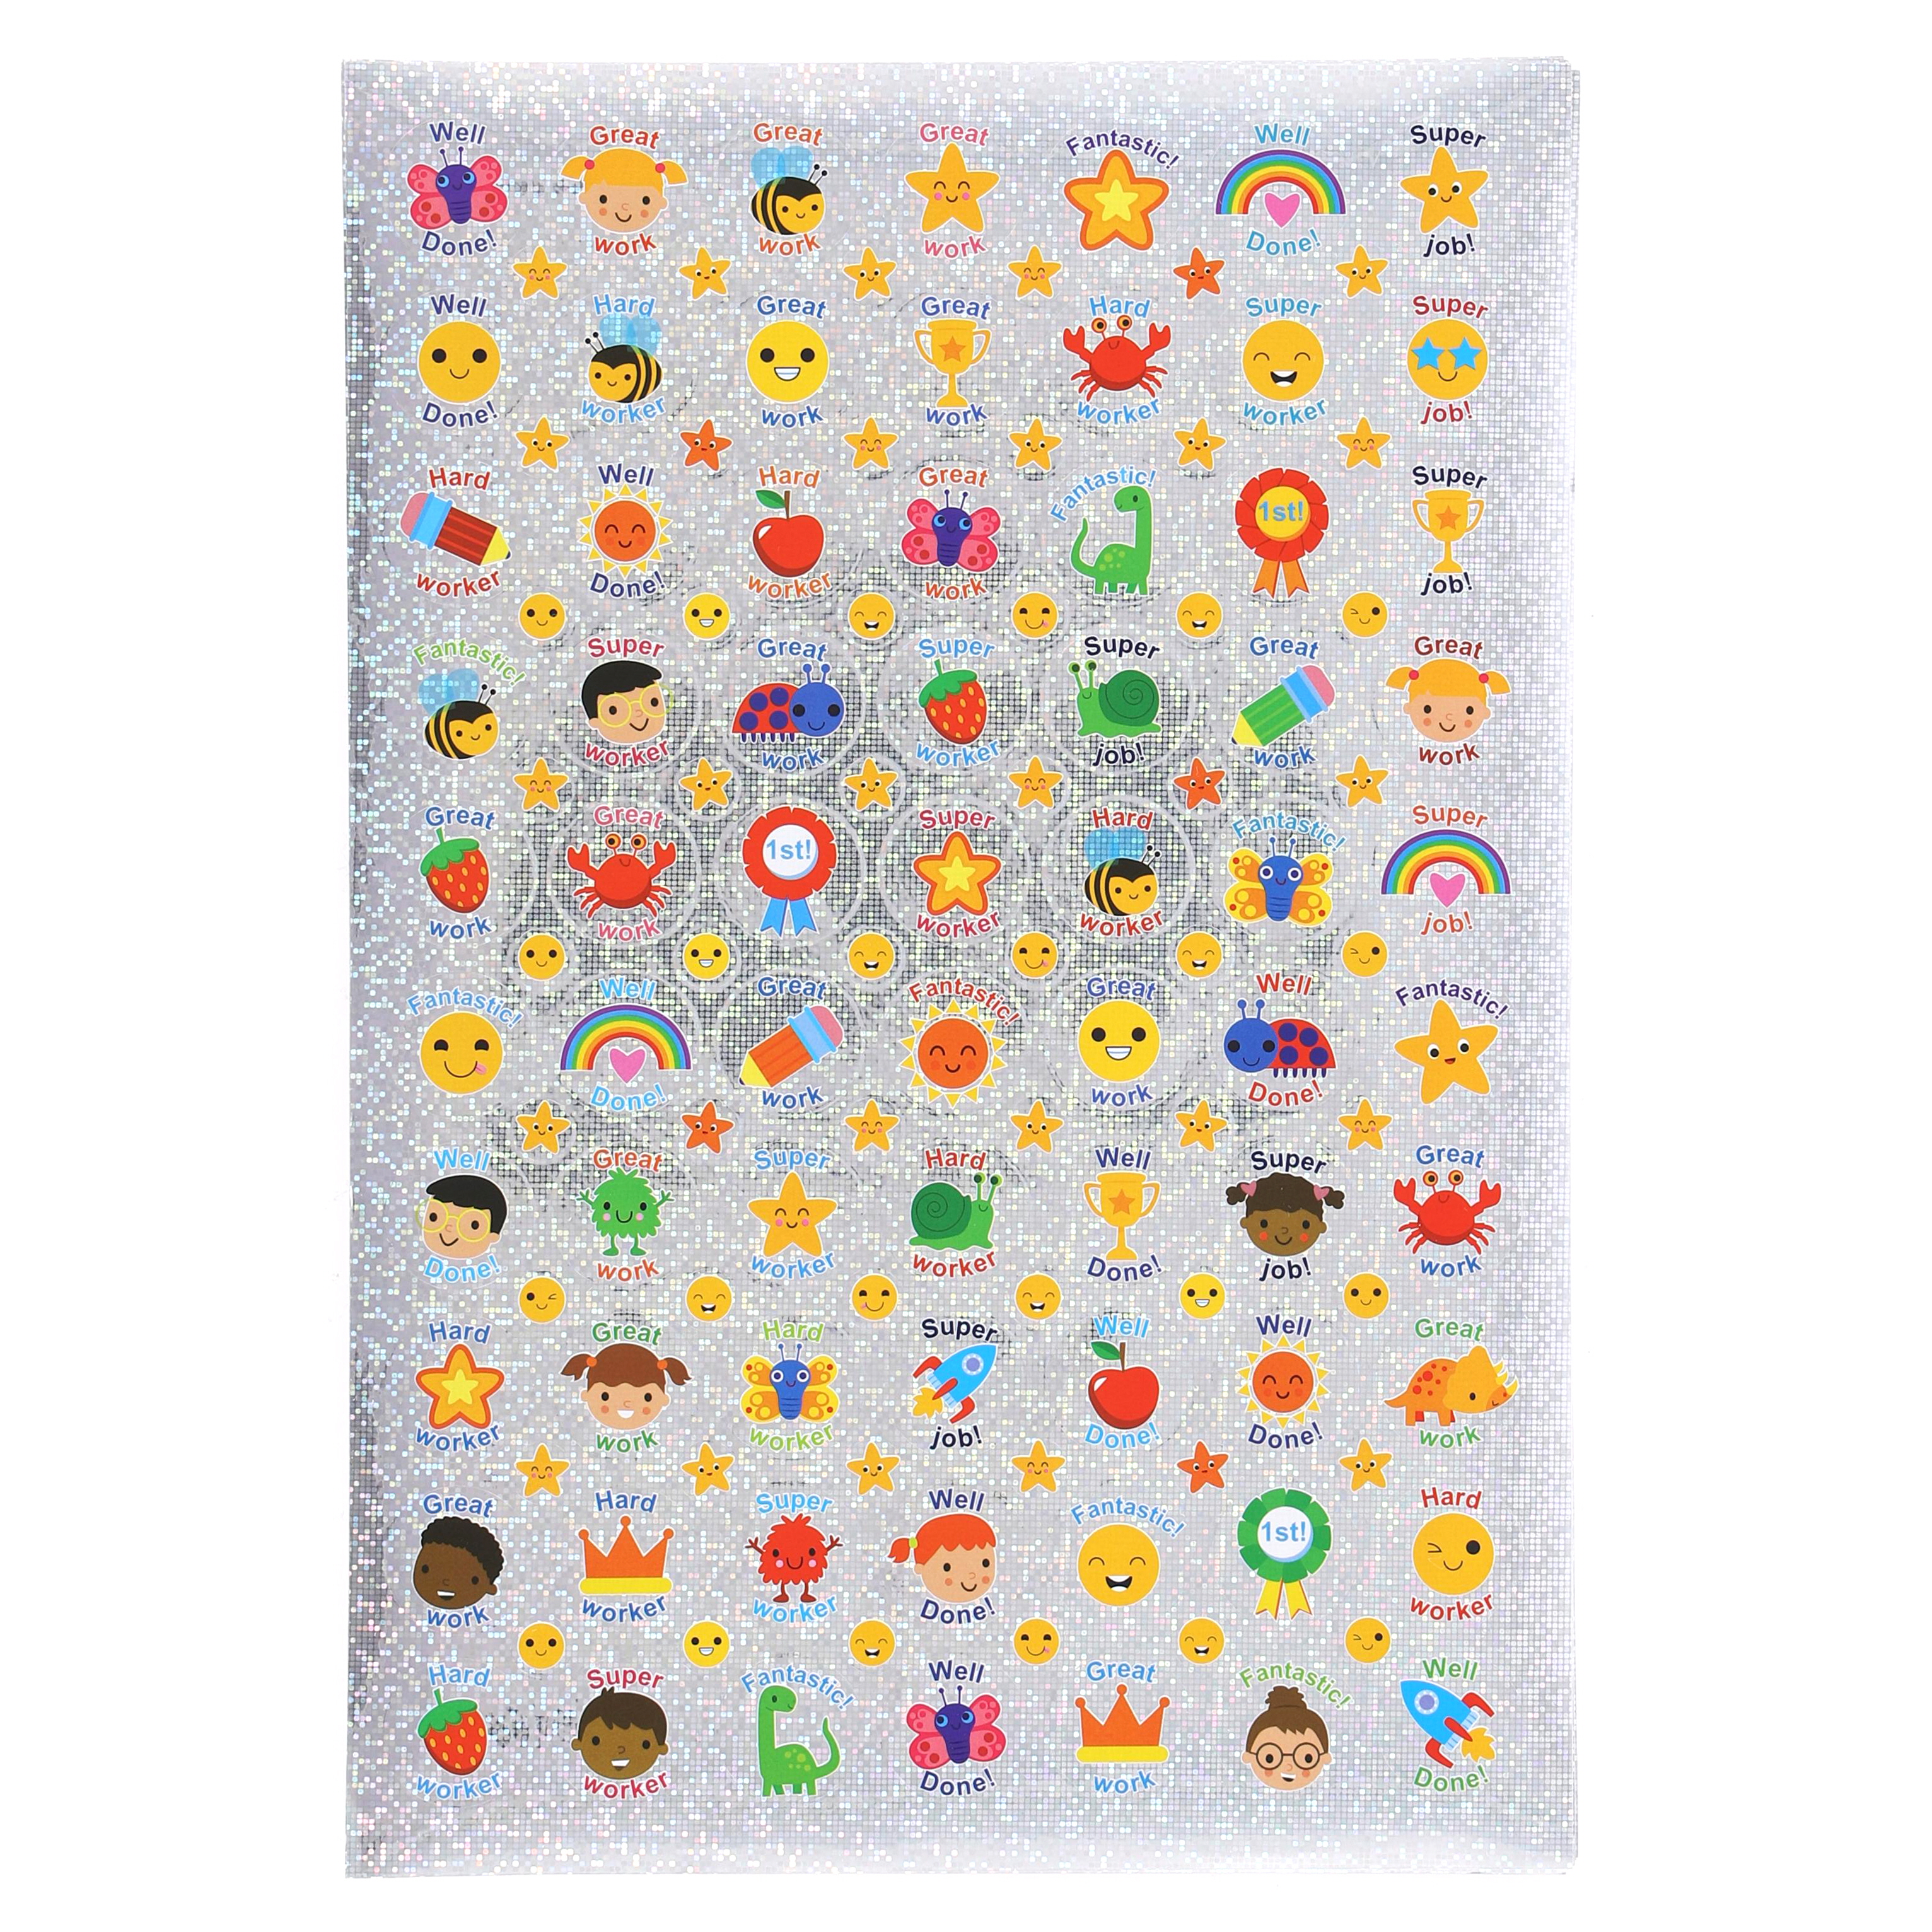 EDMT15111 - Classmates Sparkly Stickers and Mini Stickers - Pack of 1240